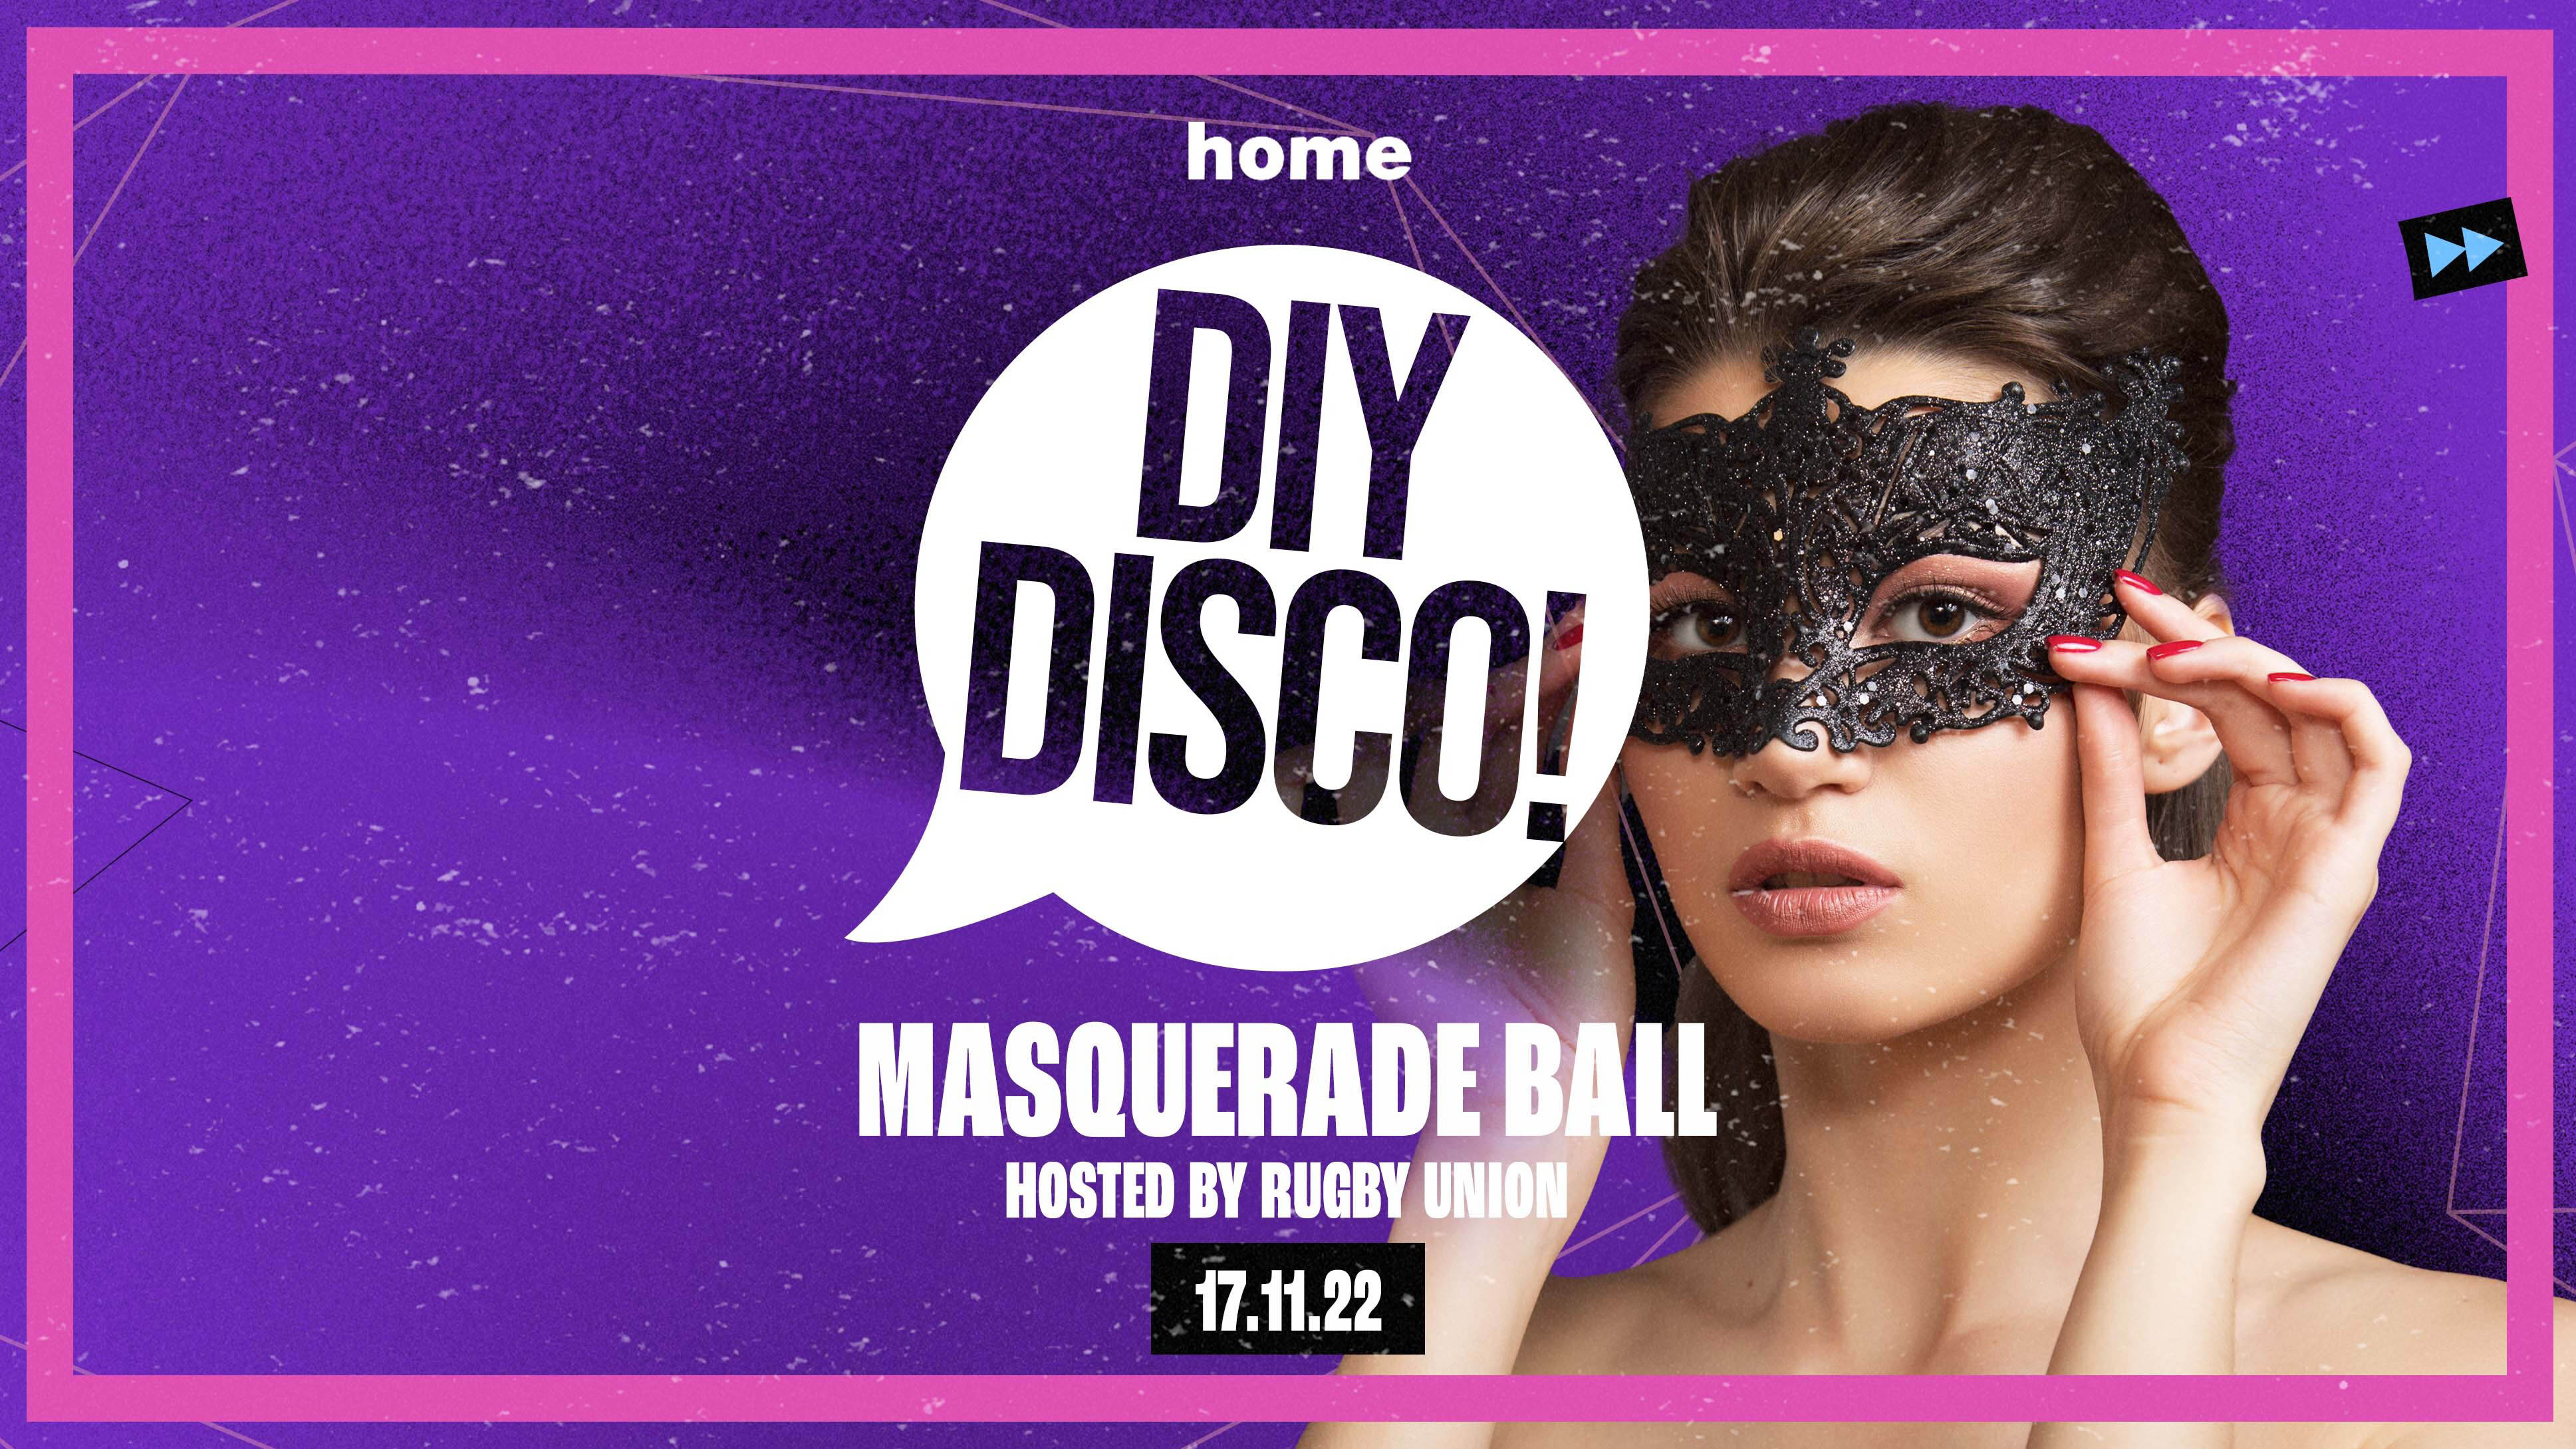 DIY “MASQUERADE” DISCO – Hosted by UOL Rugby Union